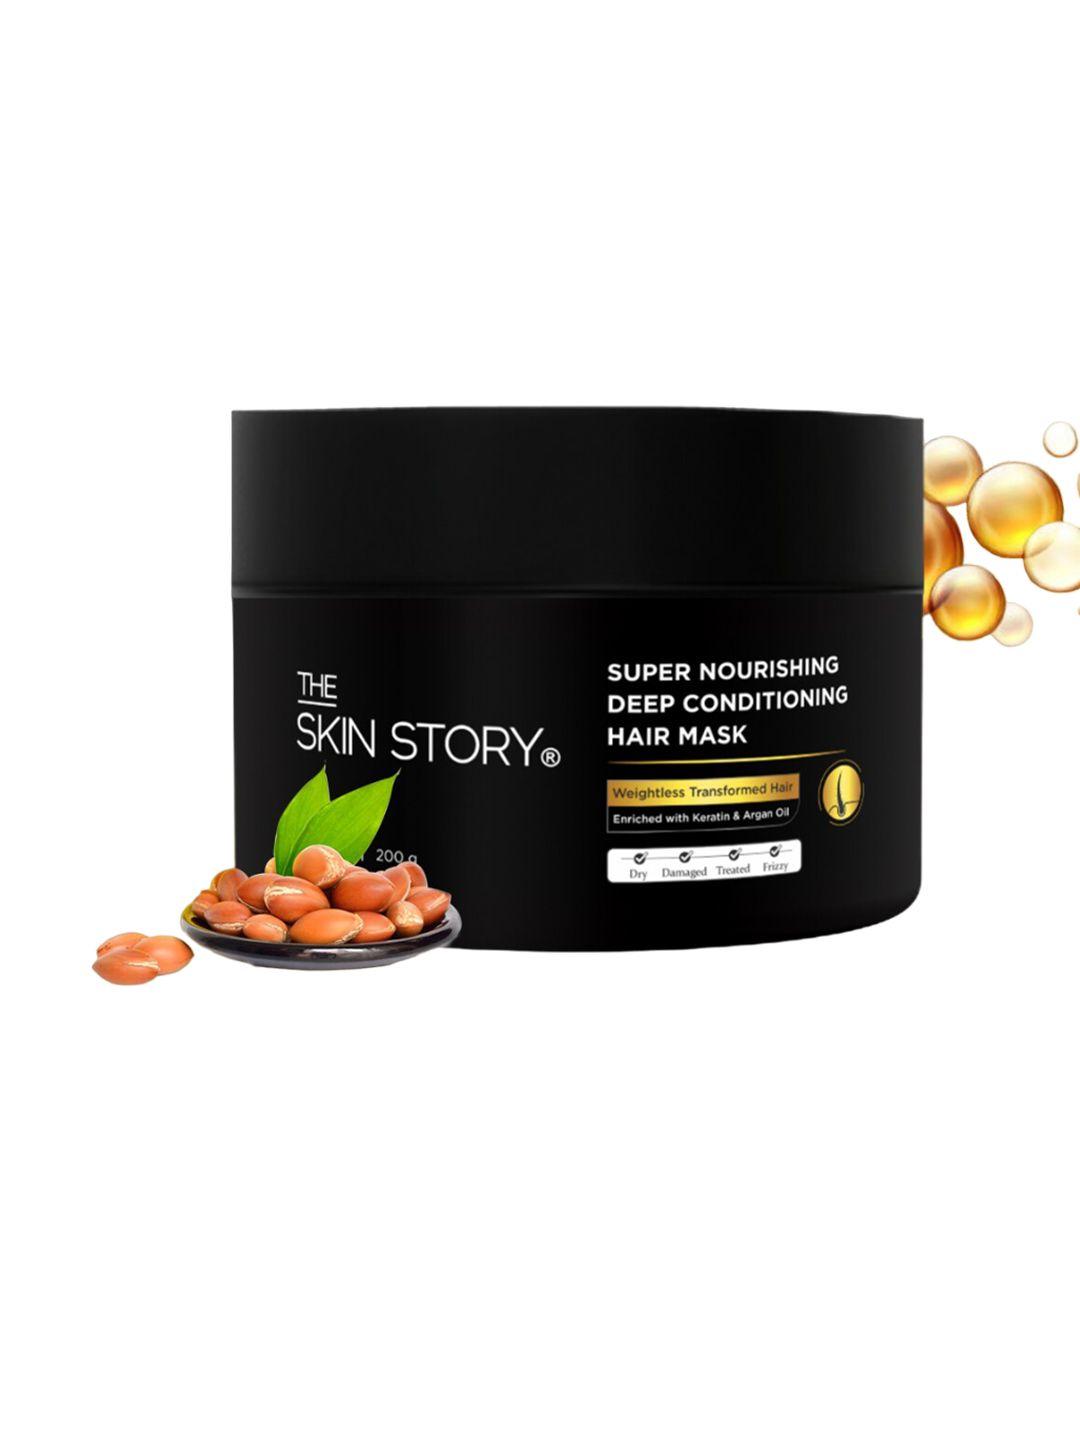 the skin story super nourishing deep conditioning hair mask - 200g